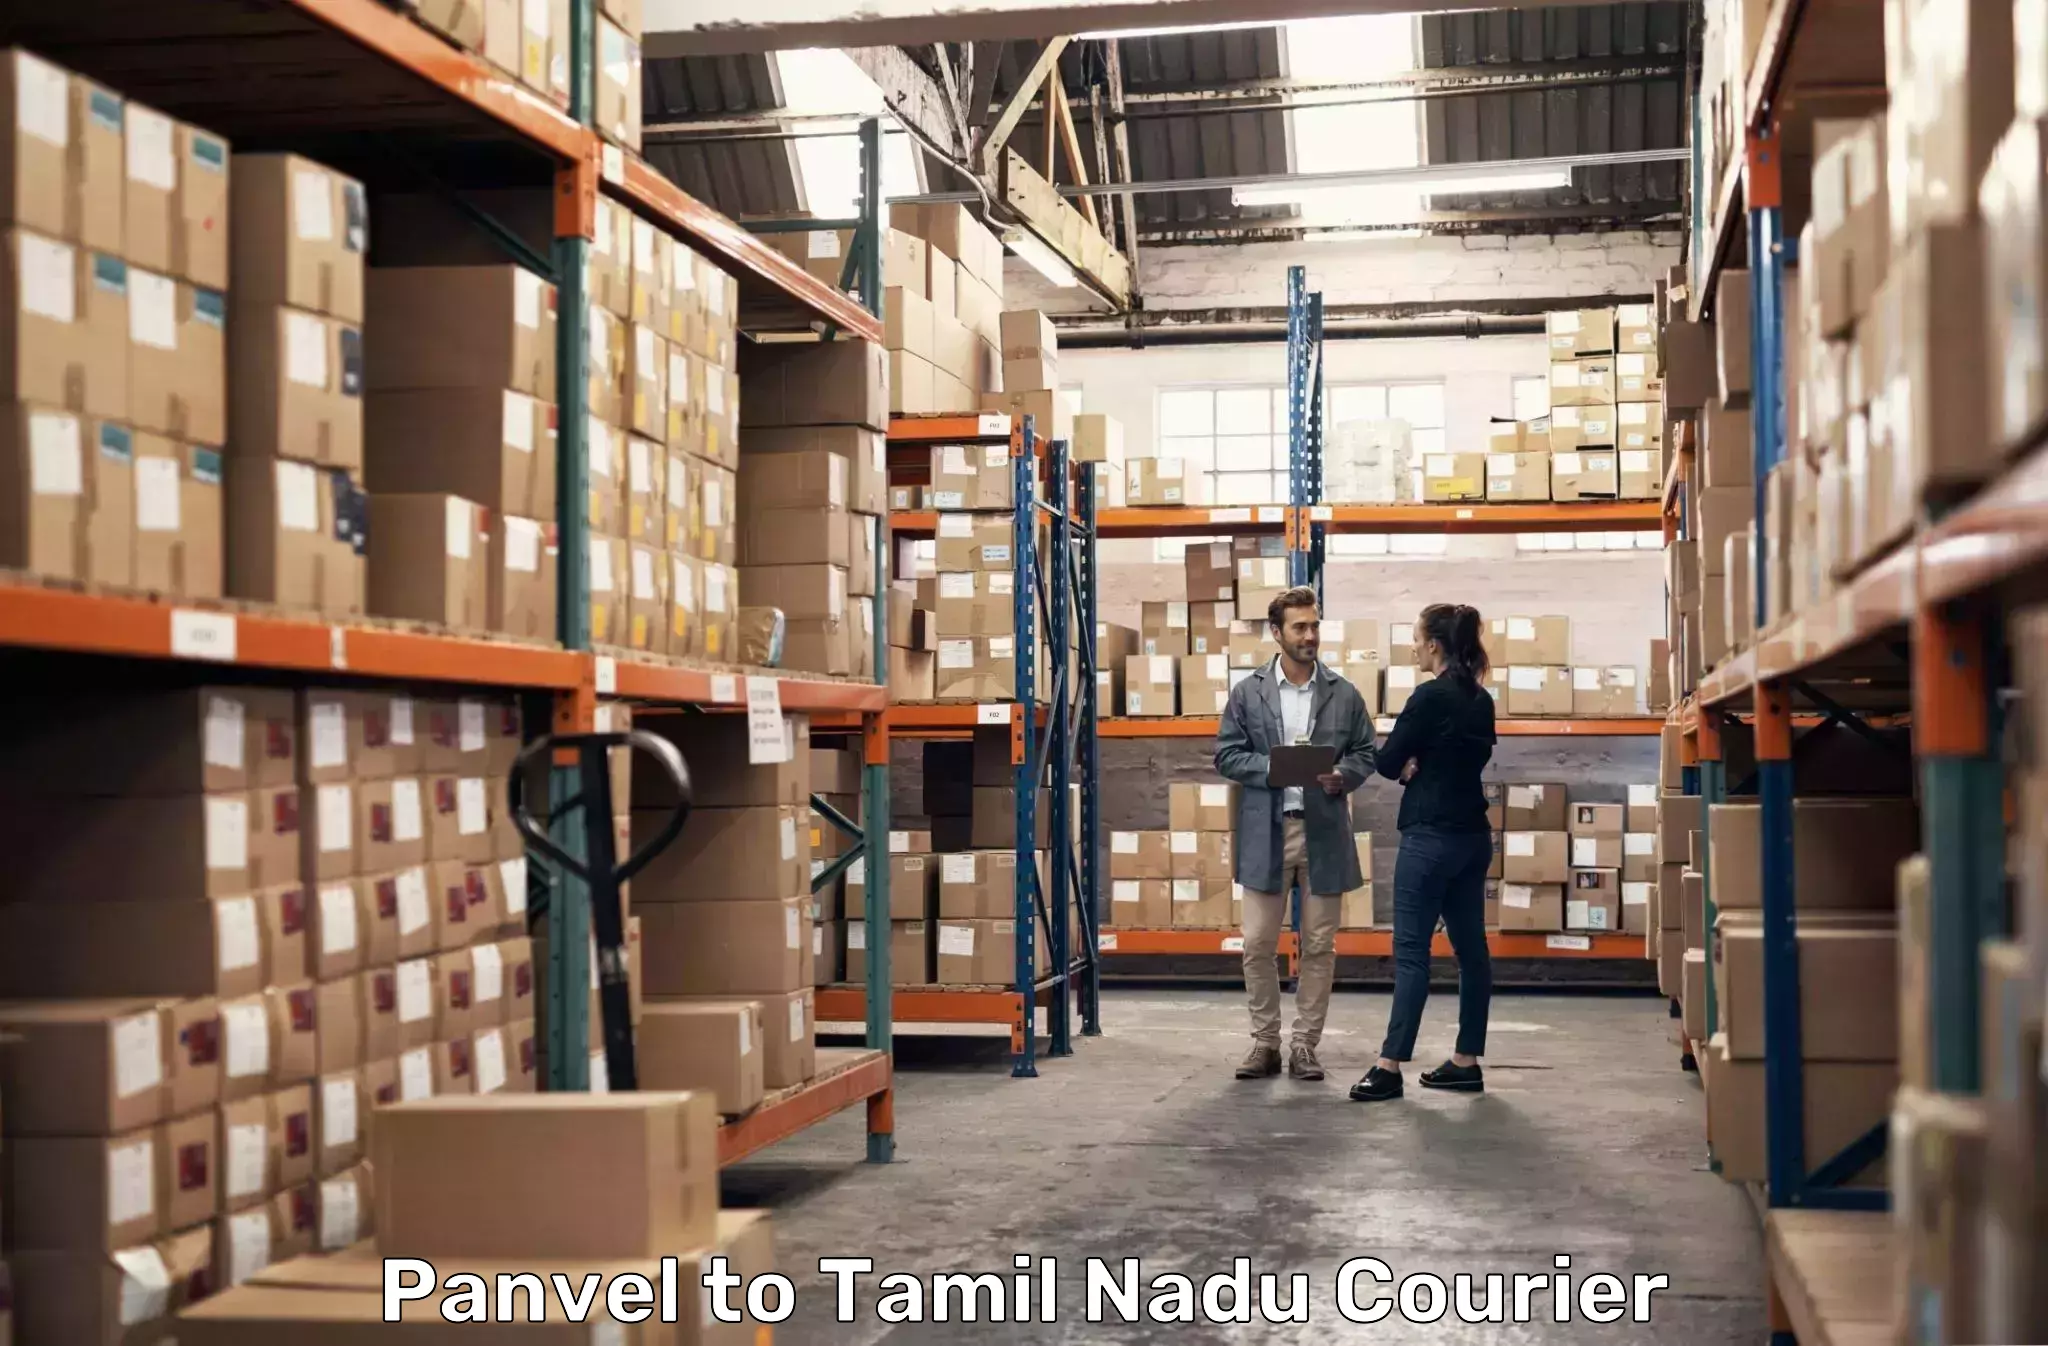 State-of-the-art courier technology Panvel to Chetpet